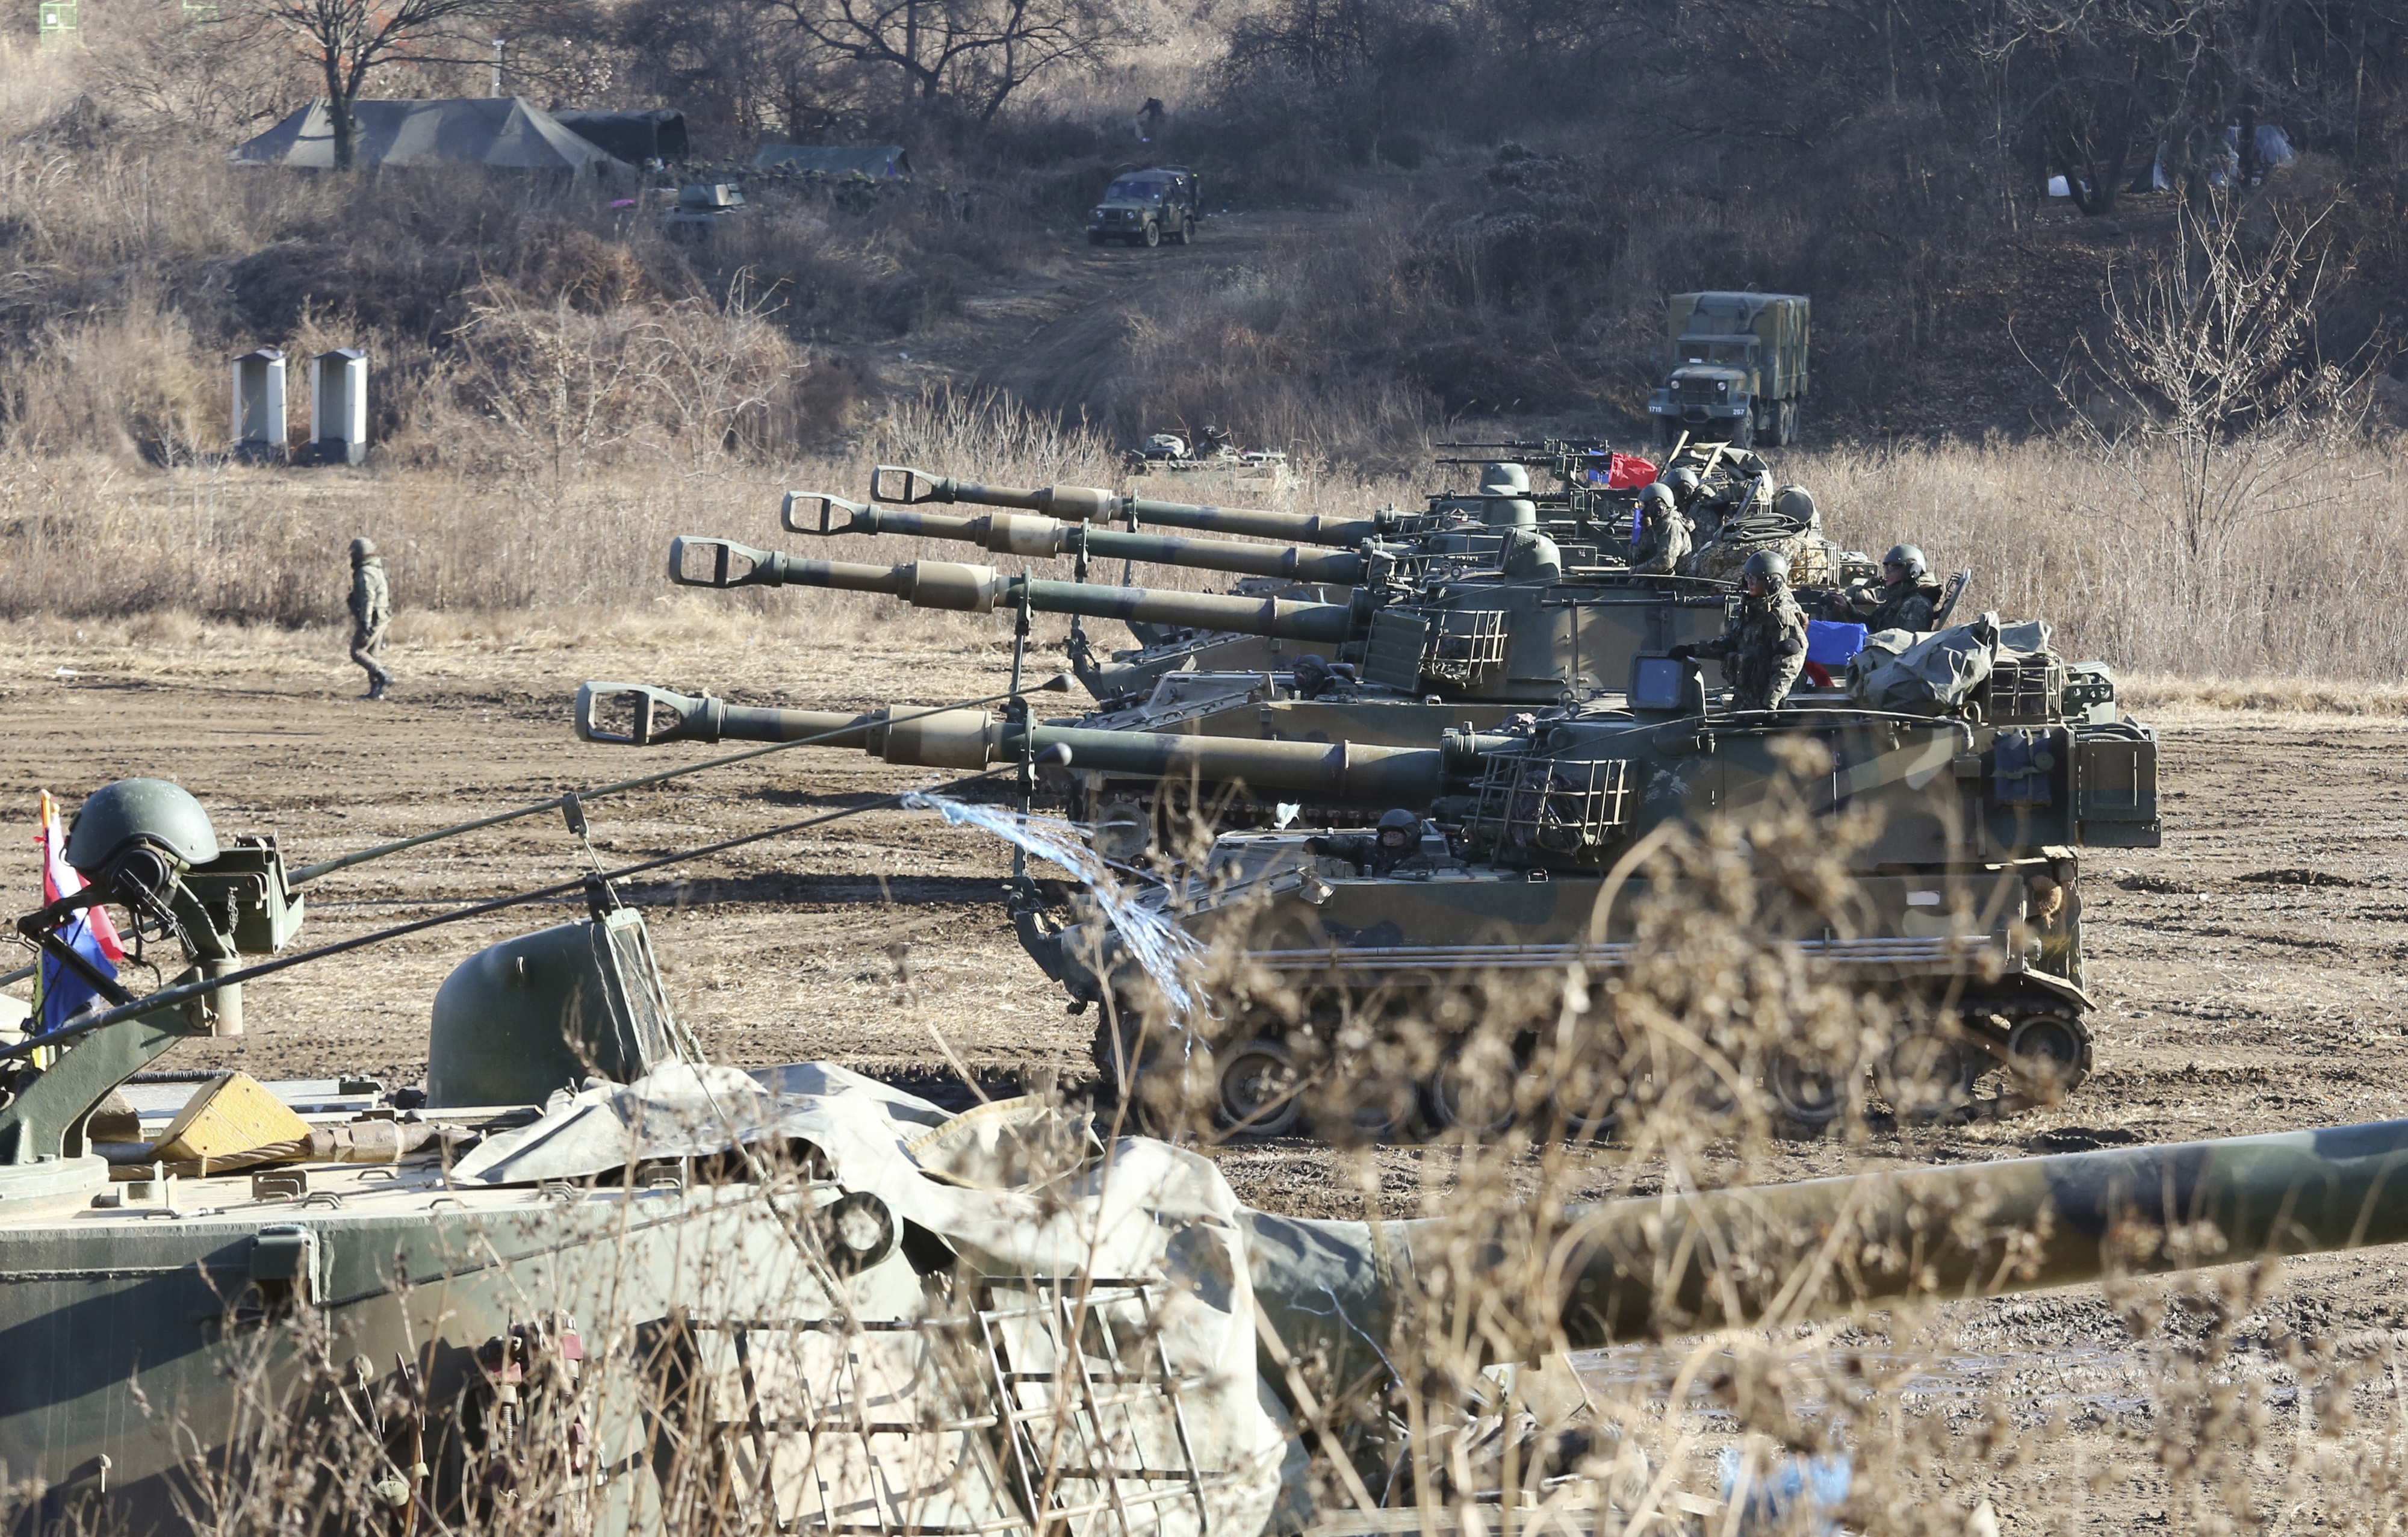 South Korean army soldiers man K-55 self-propelled howitzers during a military exercises in Paju, South Korea, near the border with North Korea, Wednesday, Nov. 29, 2017. After 2 ½ months of relative peace, North Korea launched its most powerful weapon yet early Wednesday, a presumed intercontinental ballistic missile that could put Washington and the entire eastern U.S. seaboard within range. (AP Photo/Ahn Young-joon)